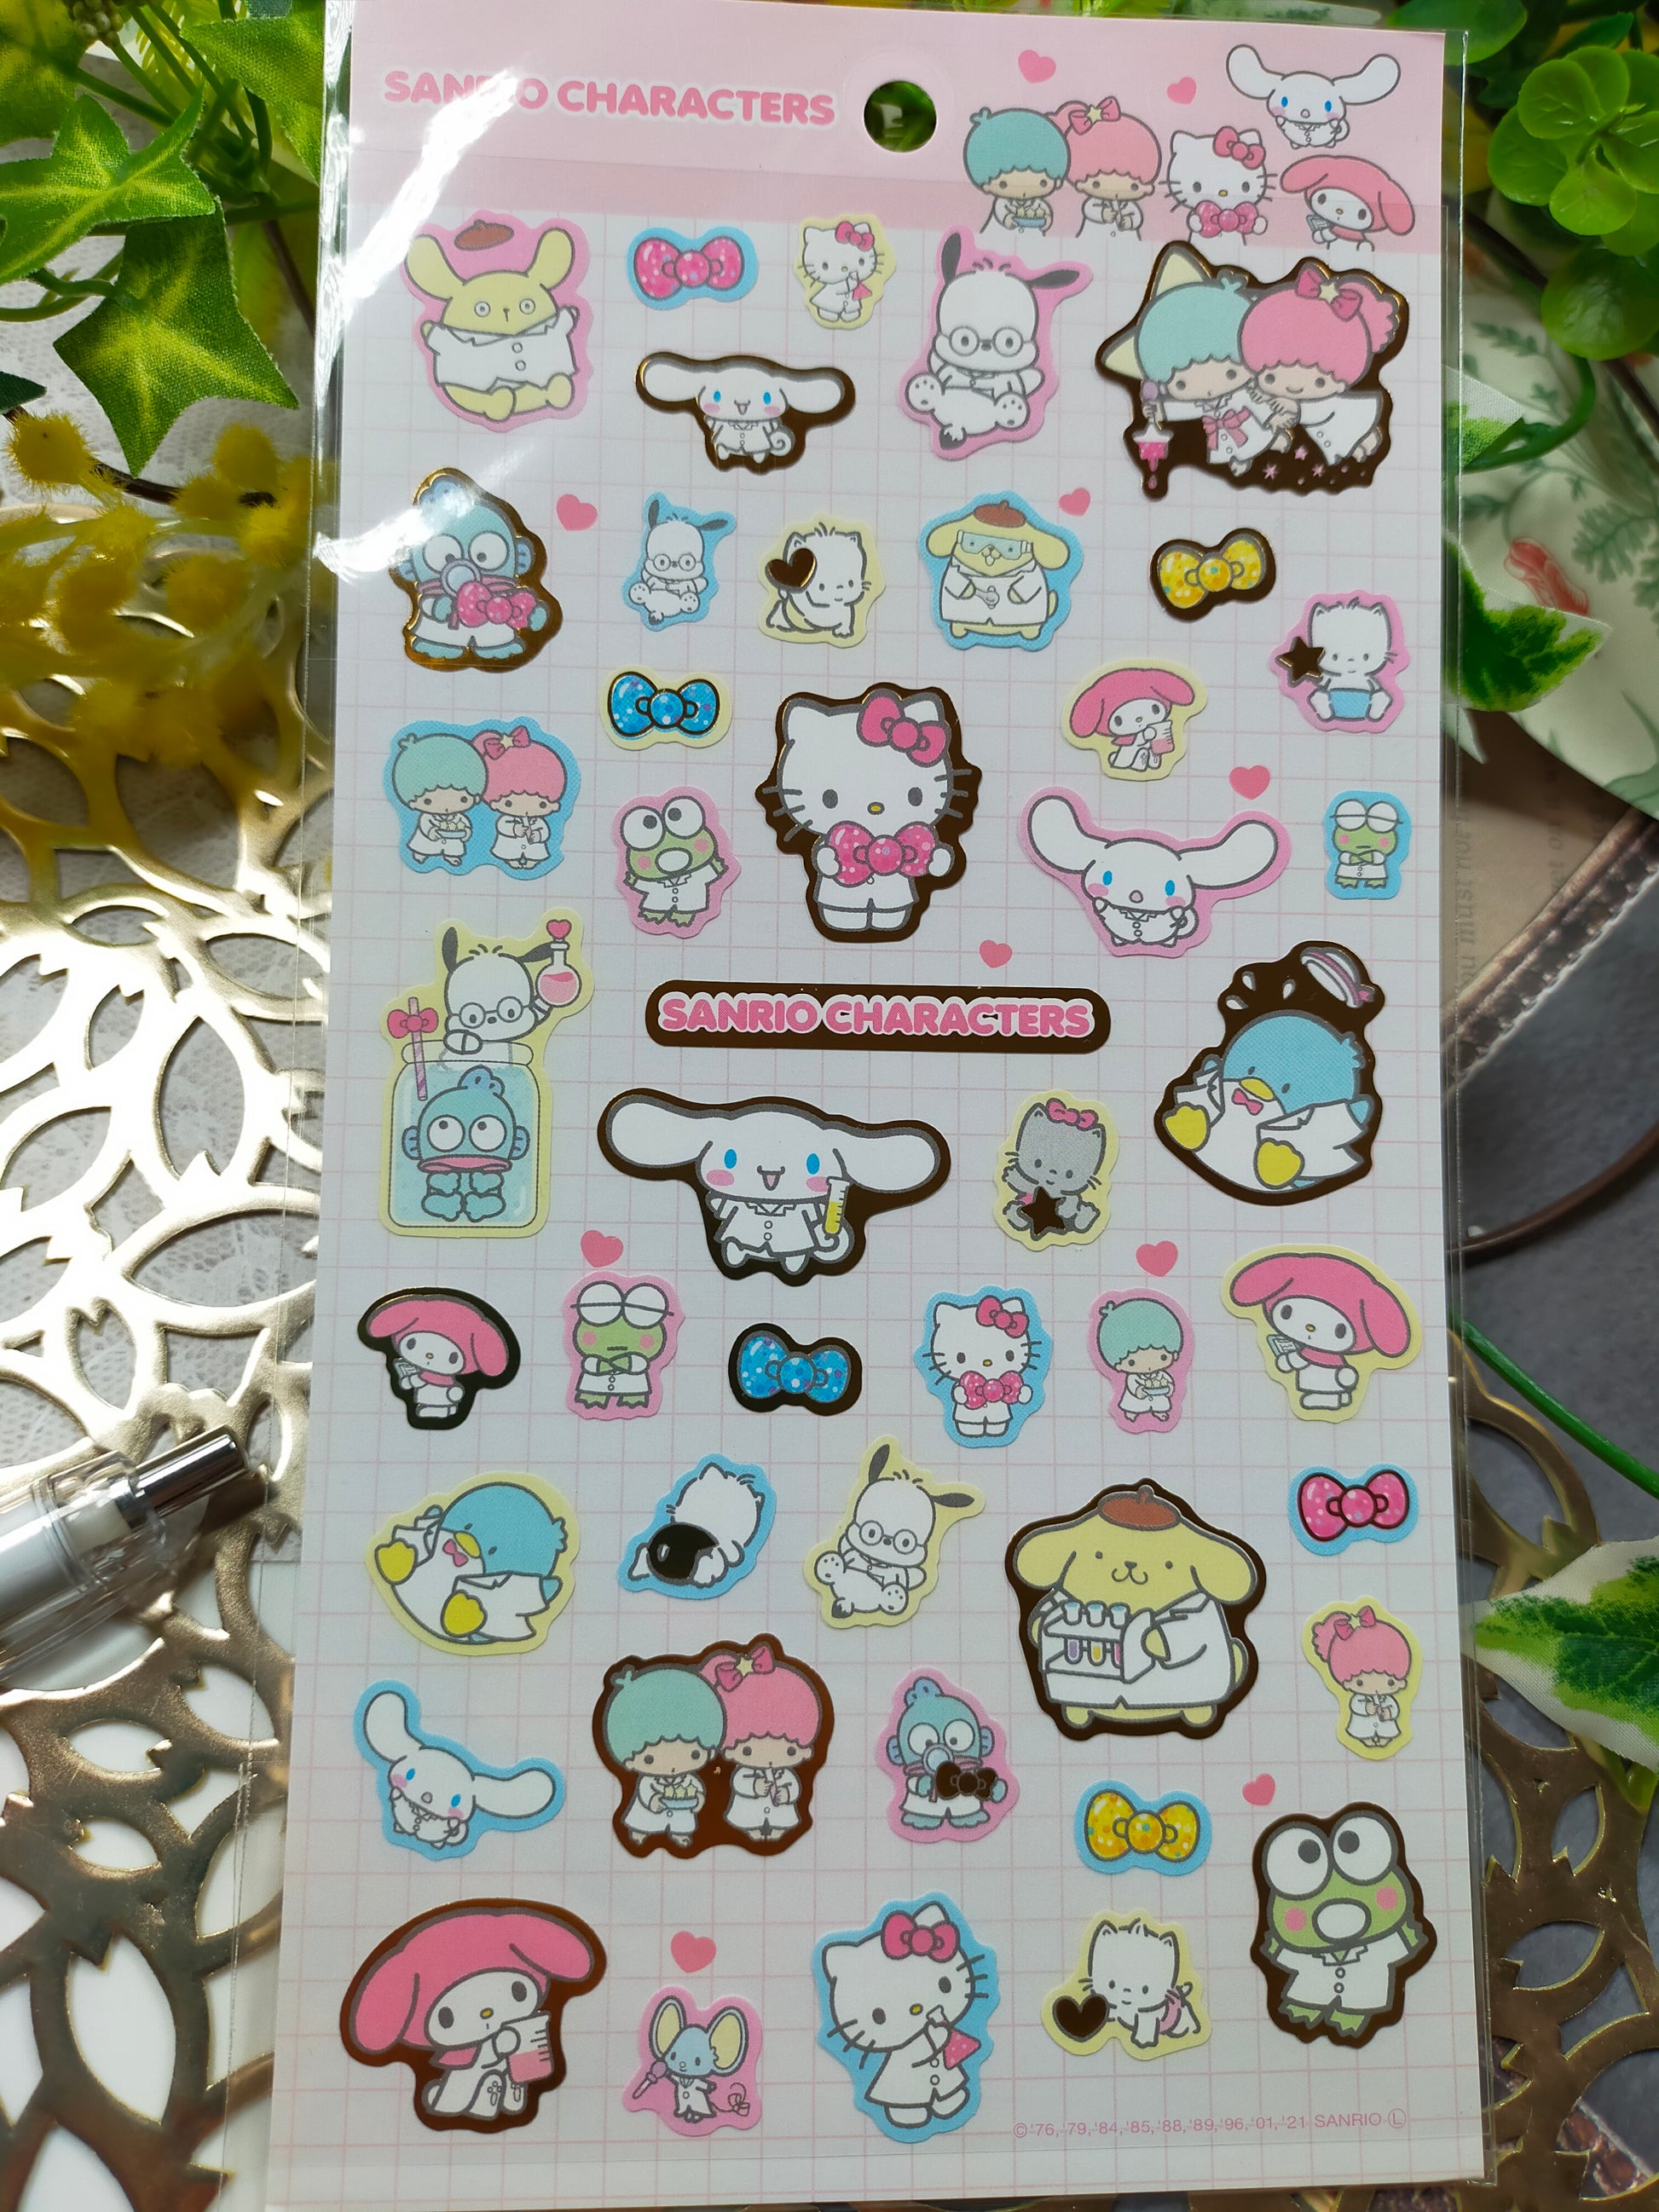 Sanrio characters Big sticker 2021_ Hello Kitty / Little Twin Stars / MY MELODY / POMPOMPURIN / SANRIO CHARACTERS